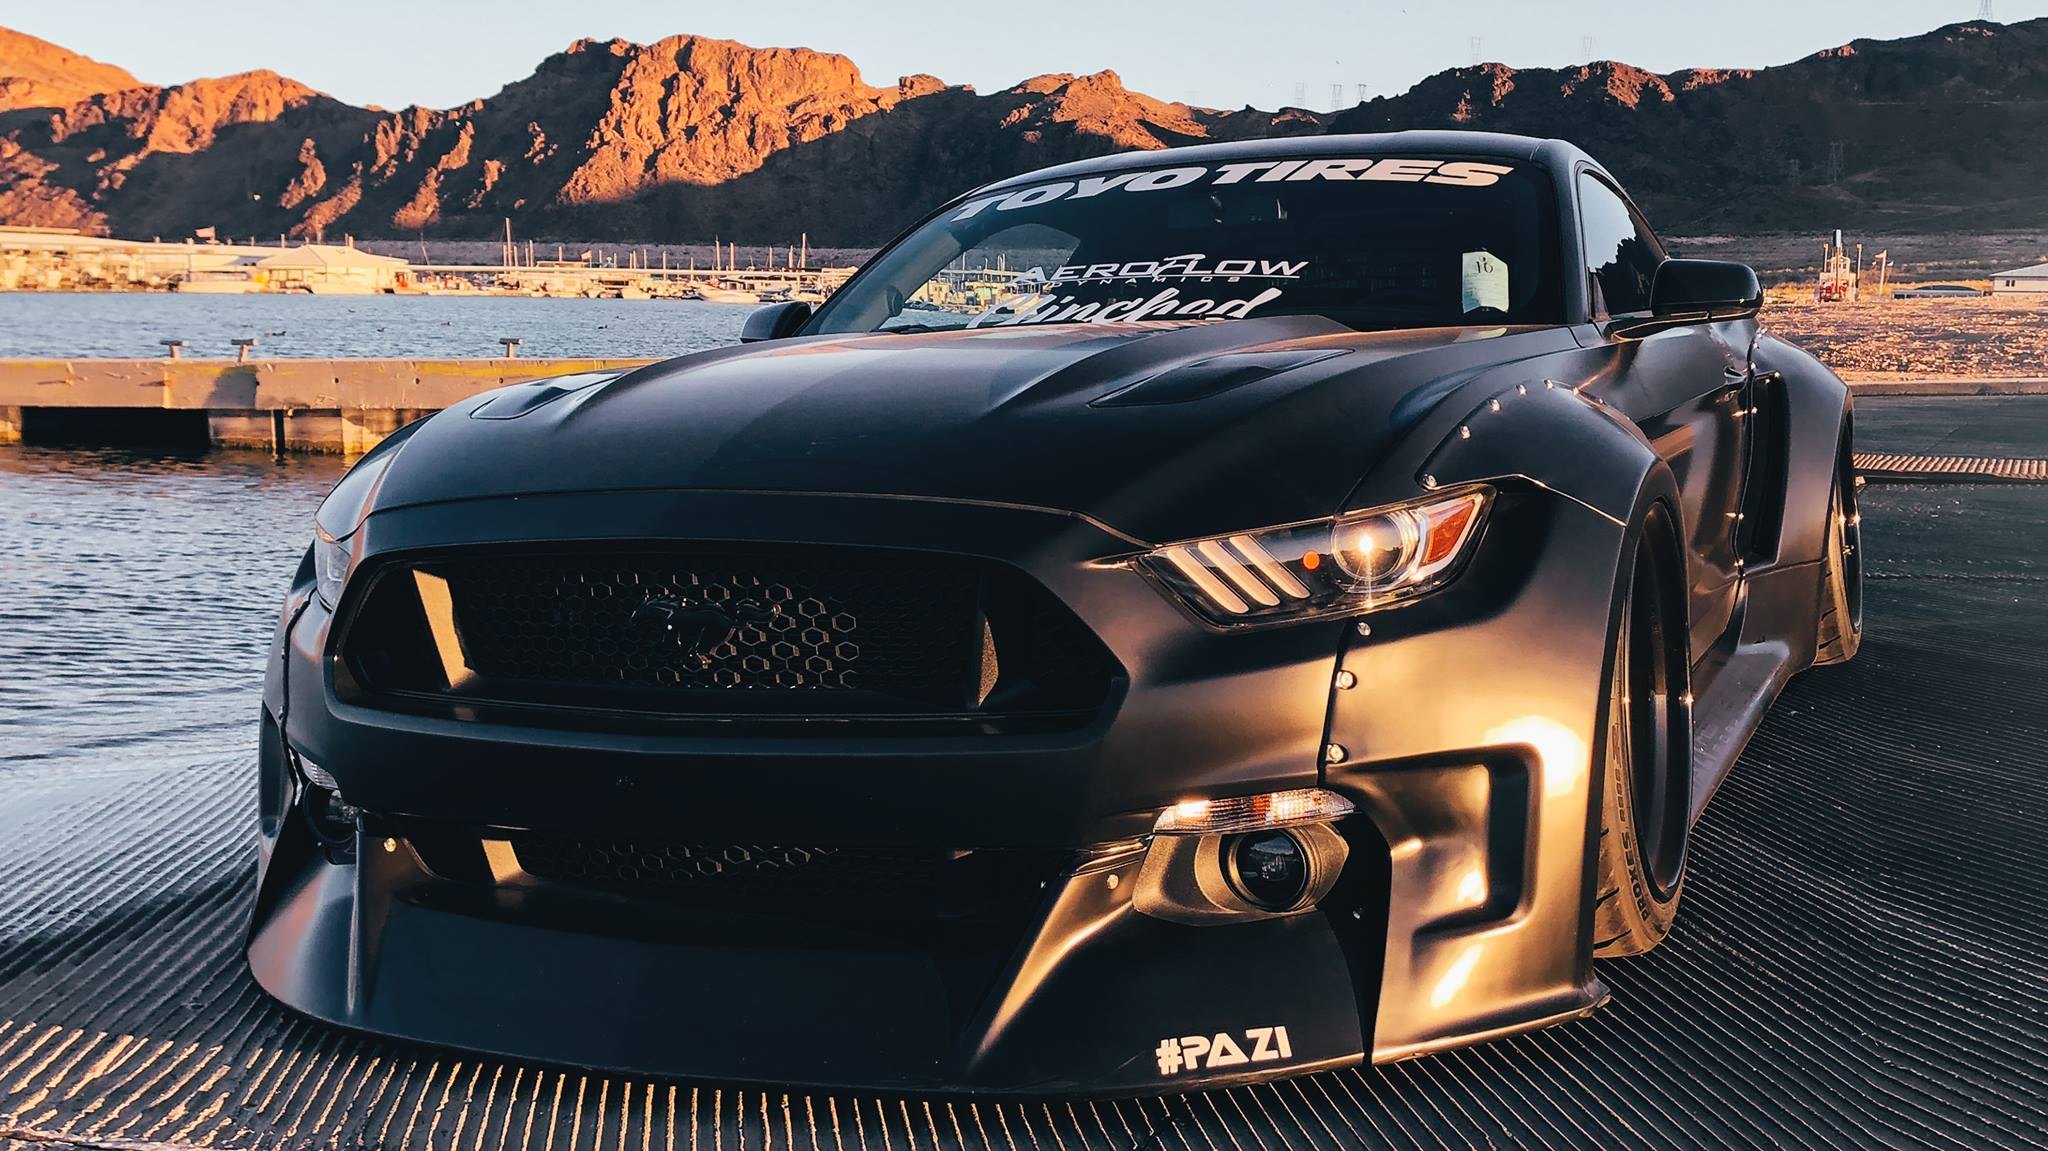 Pazi Performance Body Kit on Black Ford Mustang - Photo by Clinched